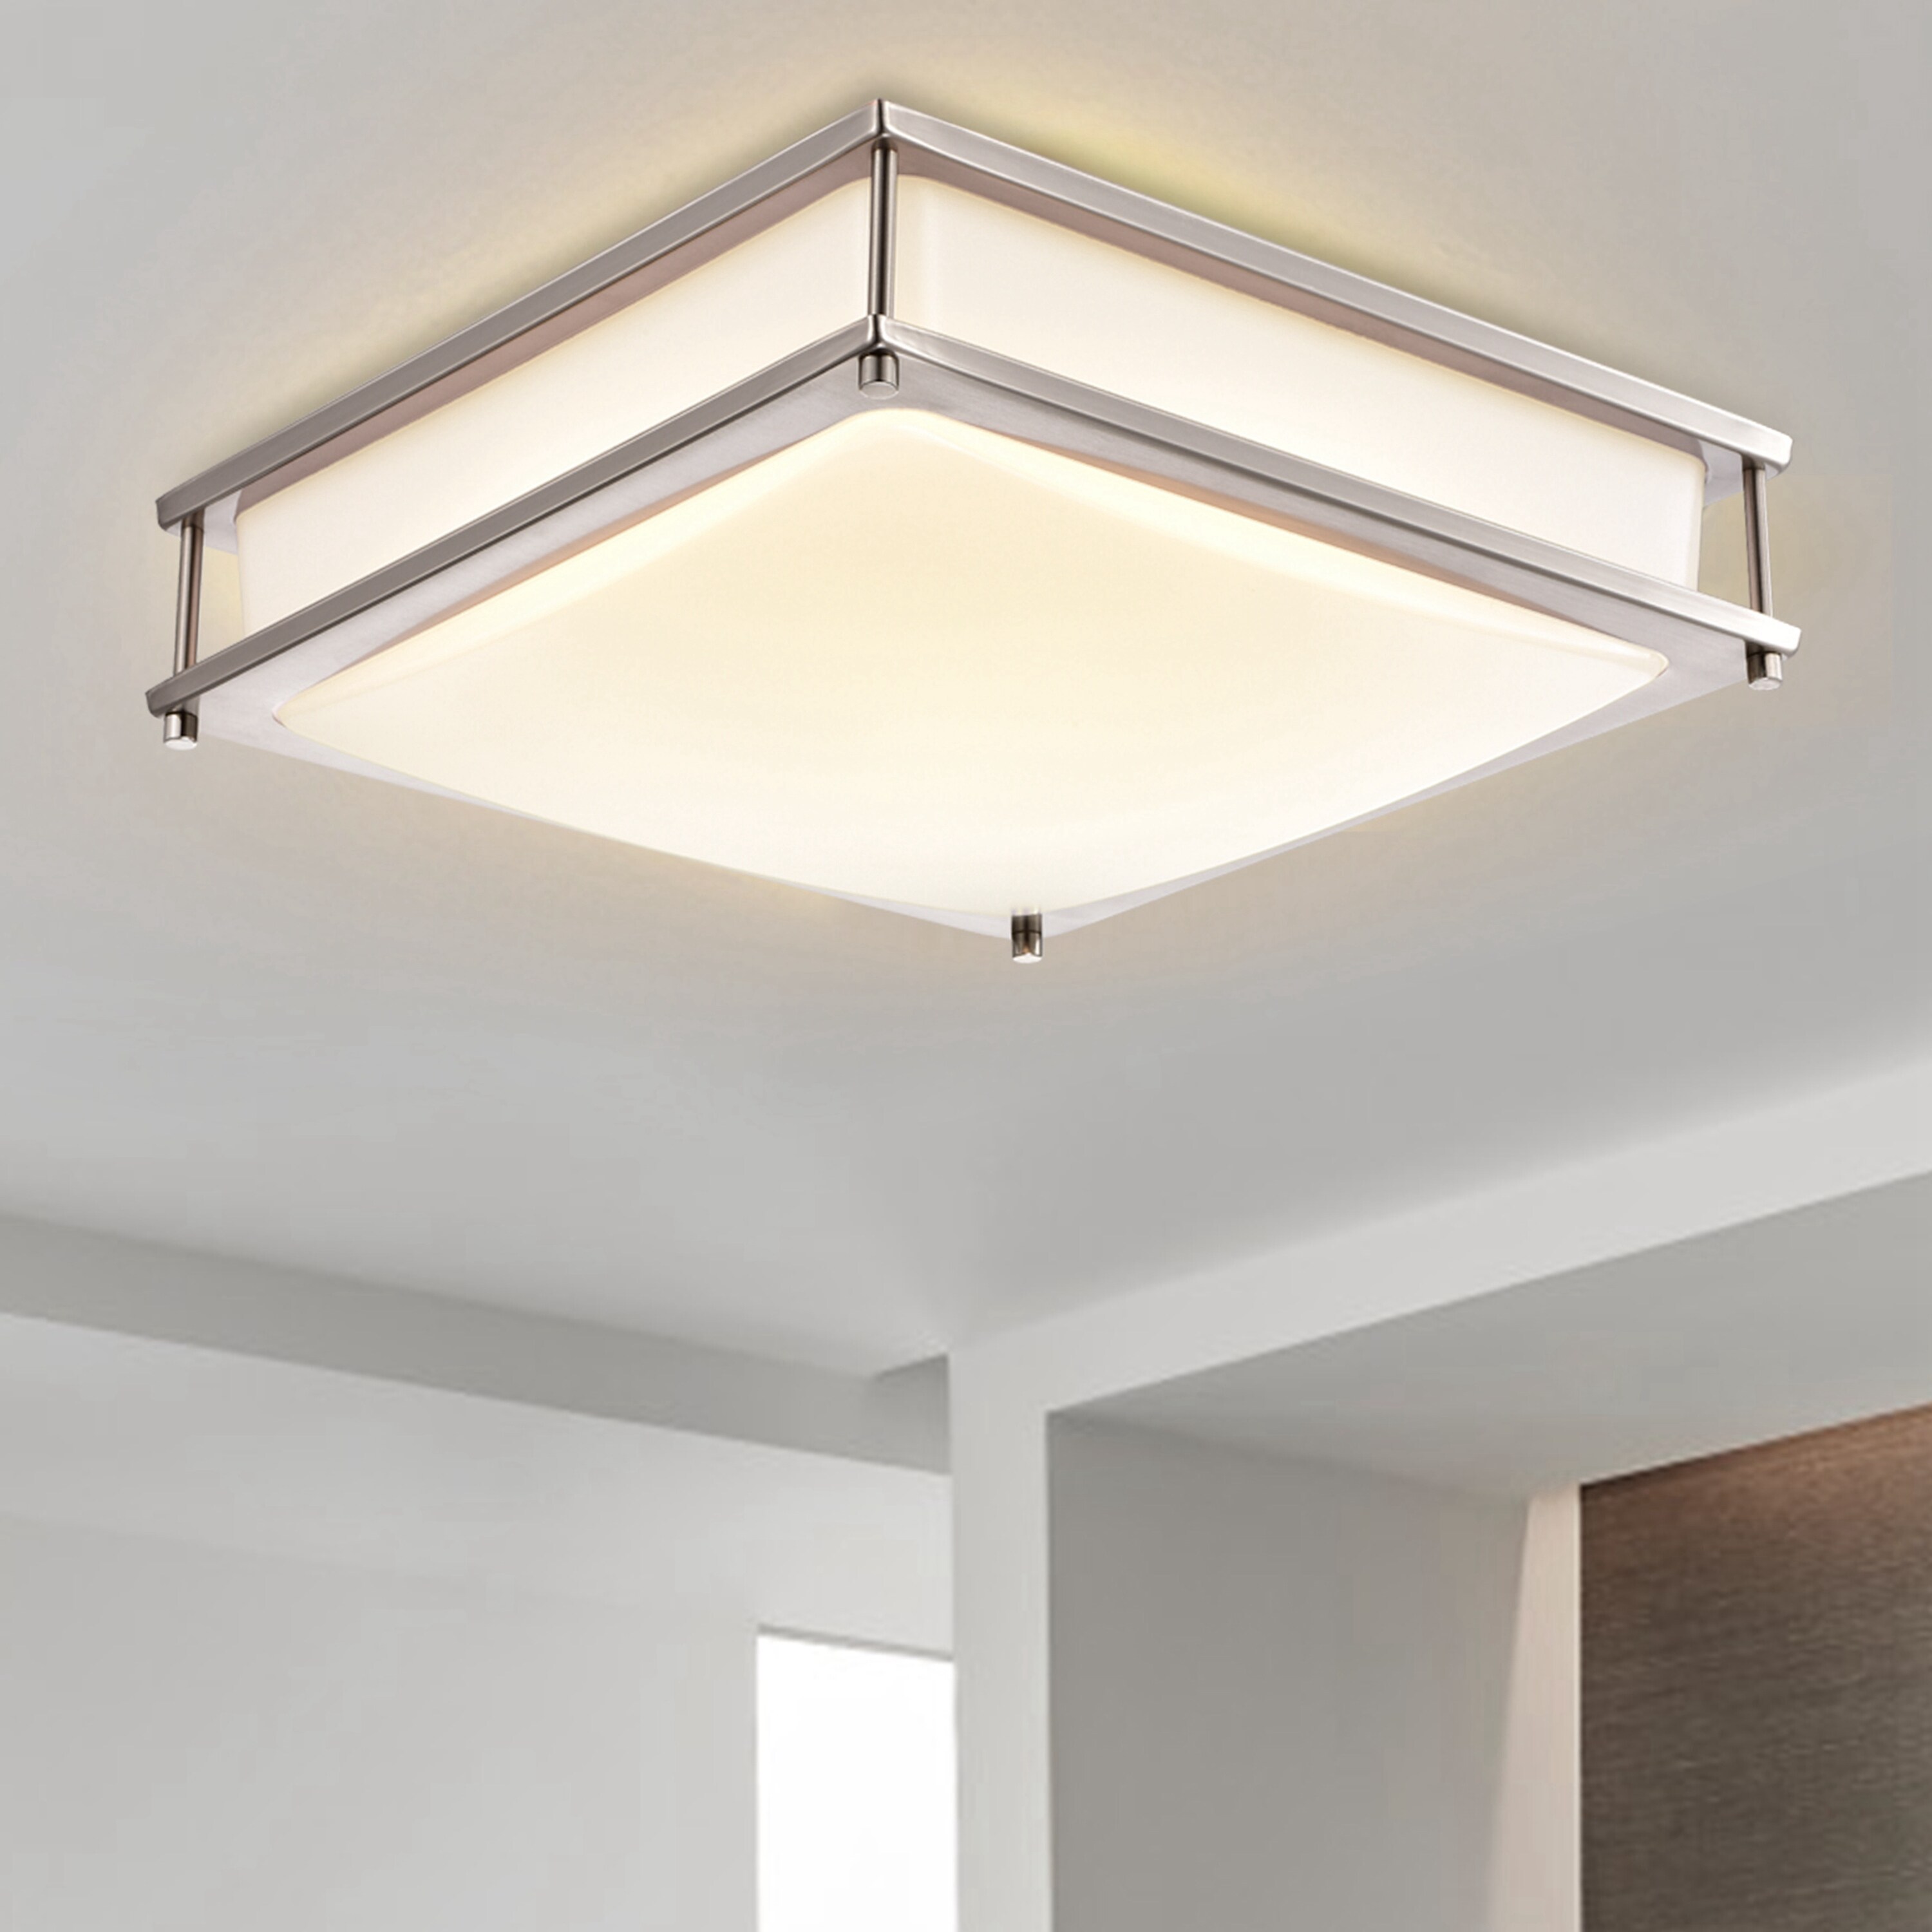 LED Ceiling Light Satin Nickel Finish 3 Lights High Quality Design NON-DIMMABLE 